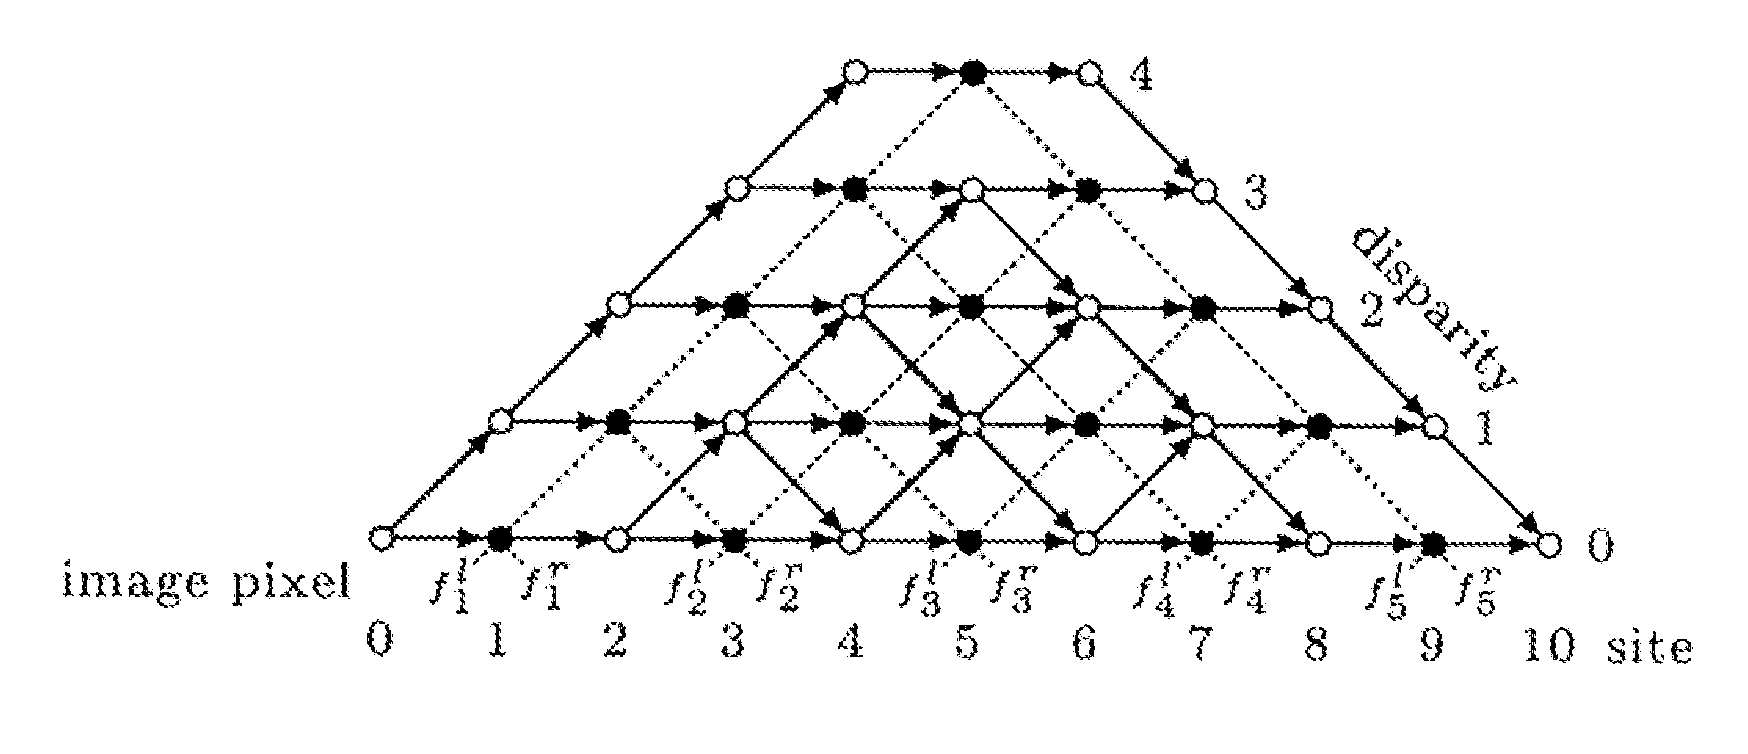 Apparatus and method for stereo matching